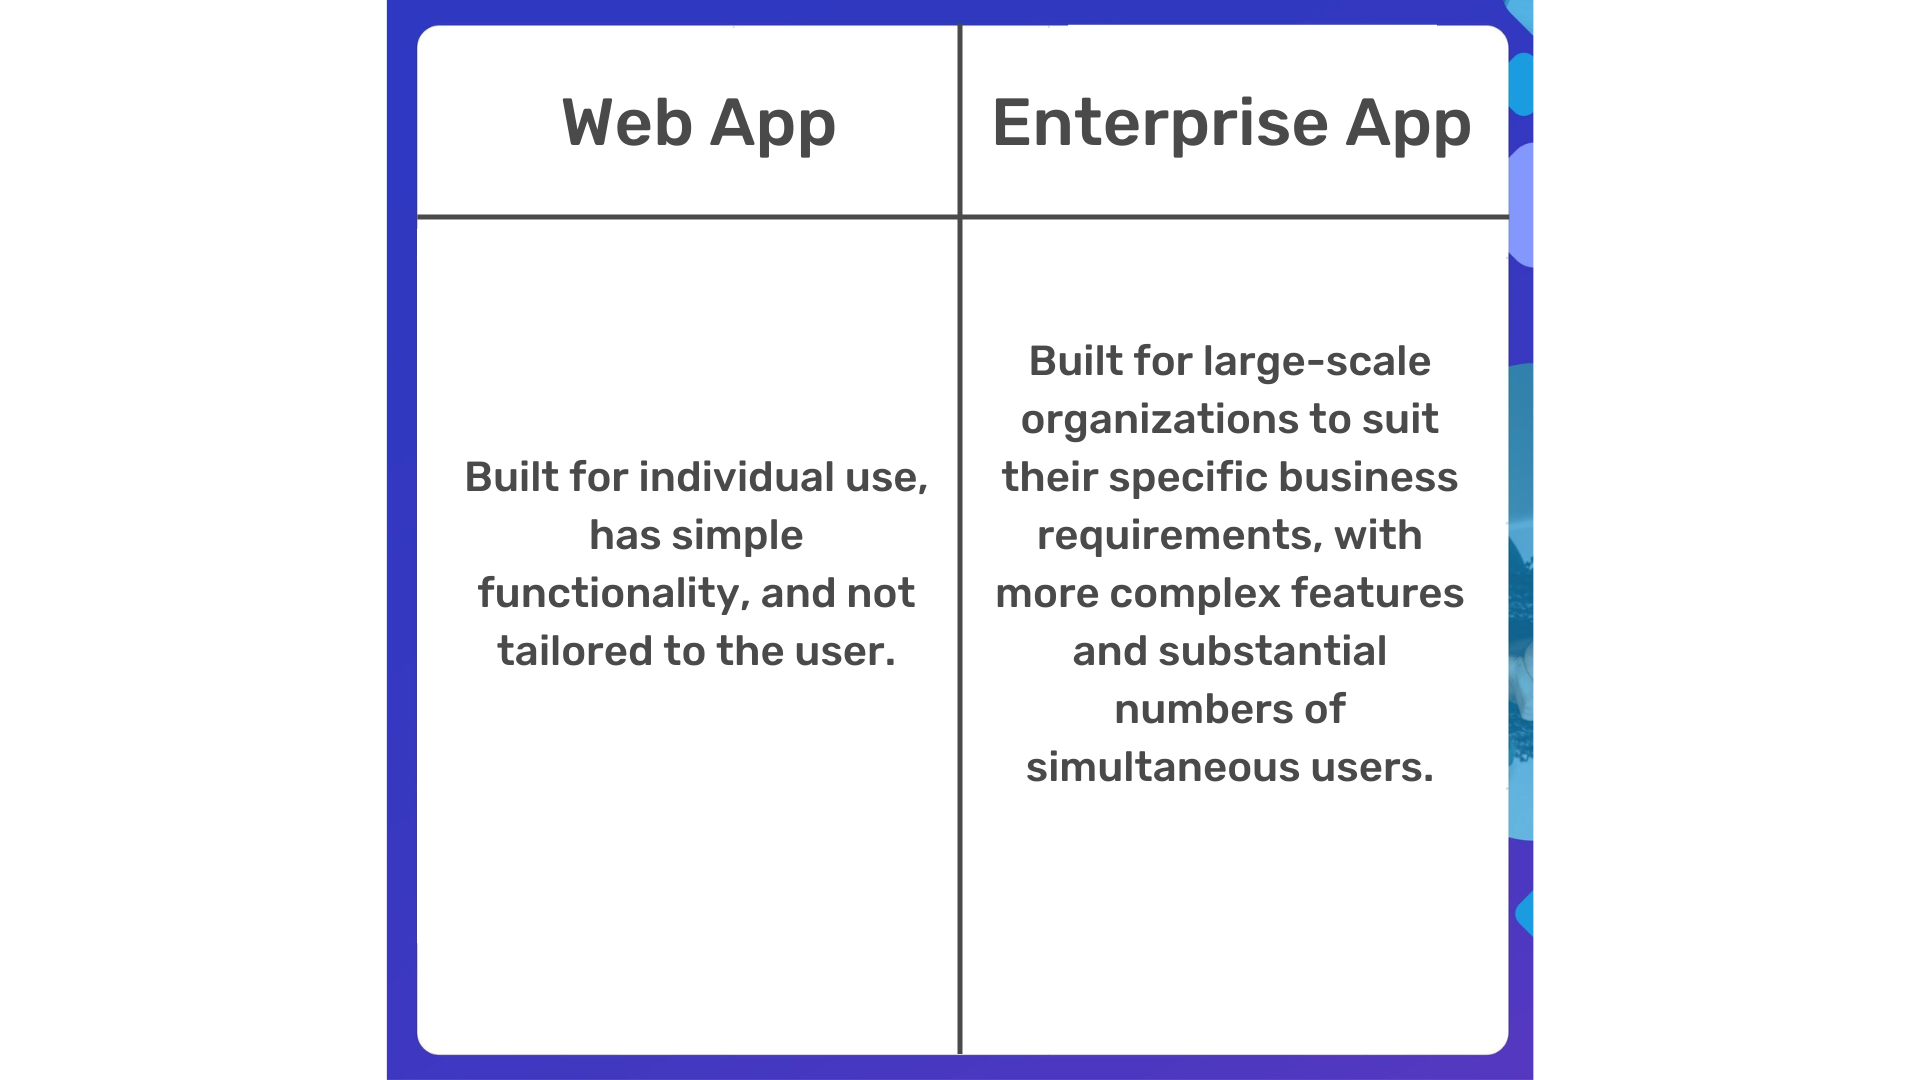 The difference between a web application and an enterprise application